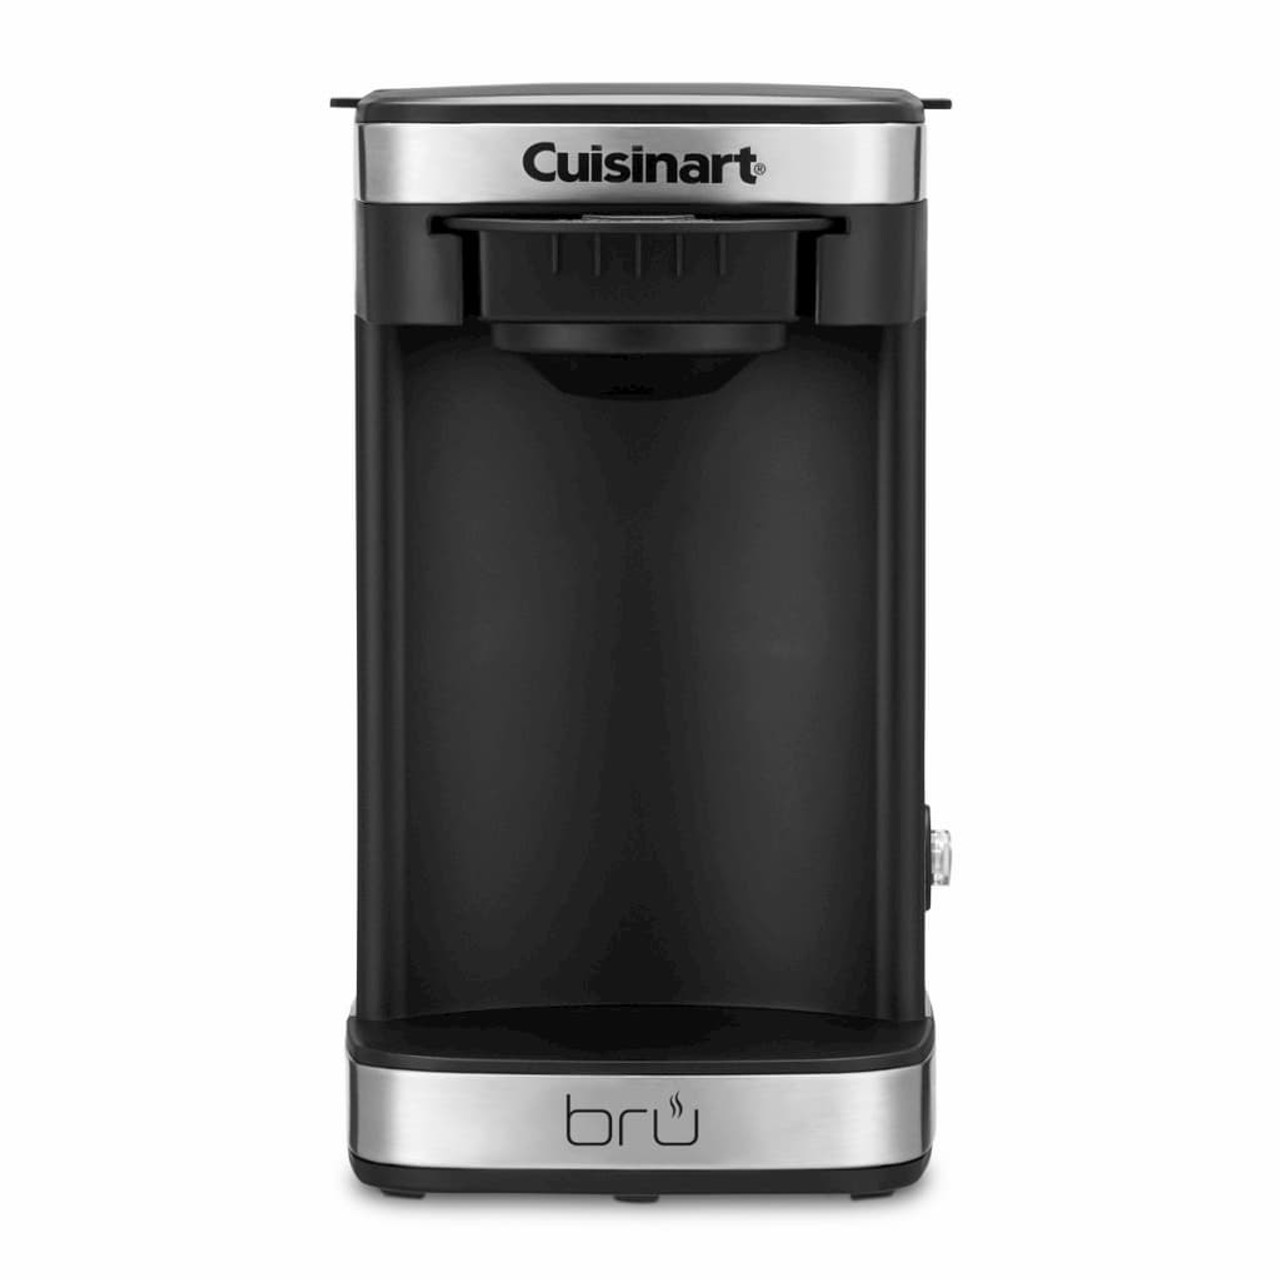 Cuisinart Bru Stainless 1-Cup Brewer | Black